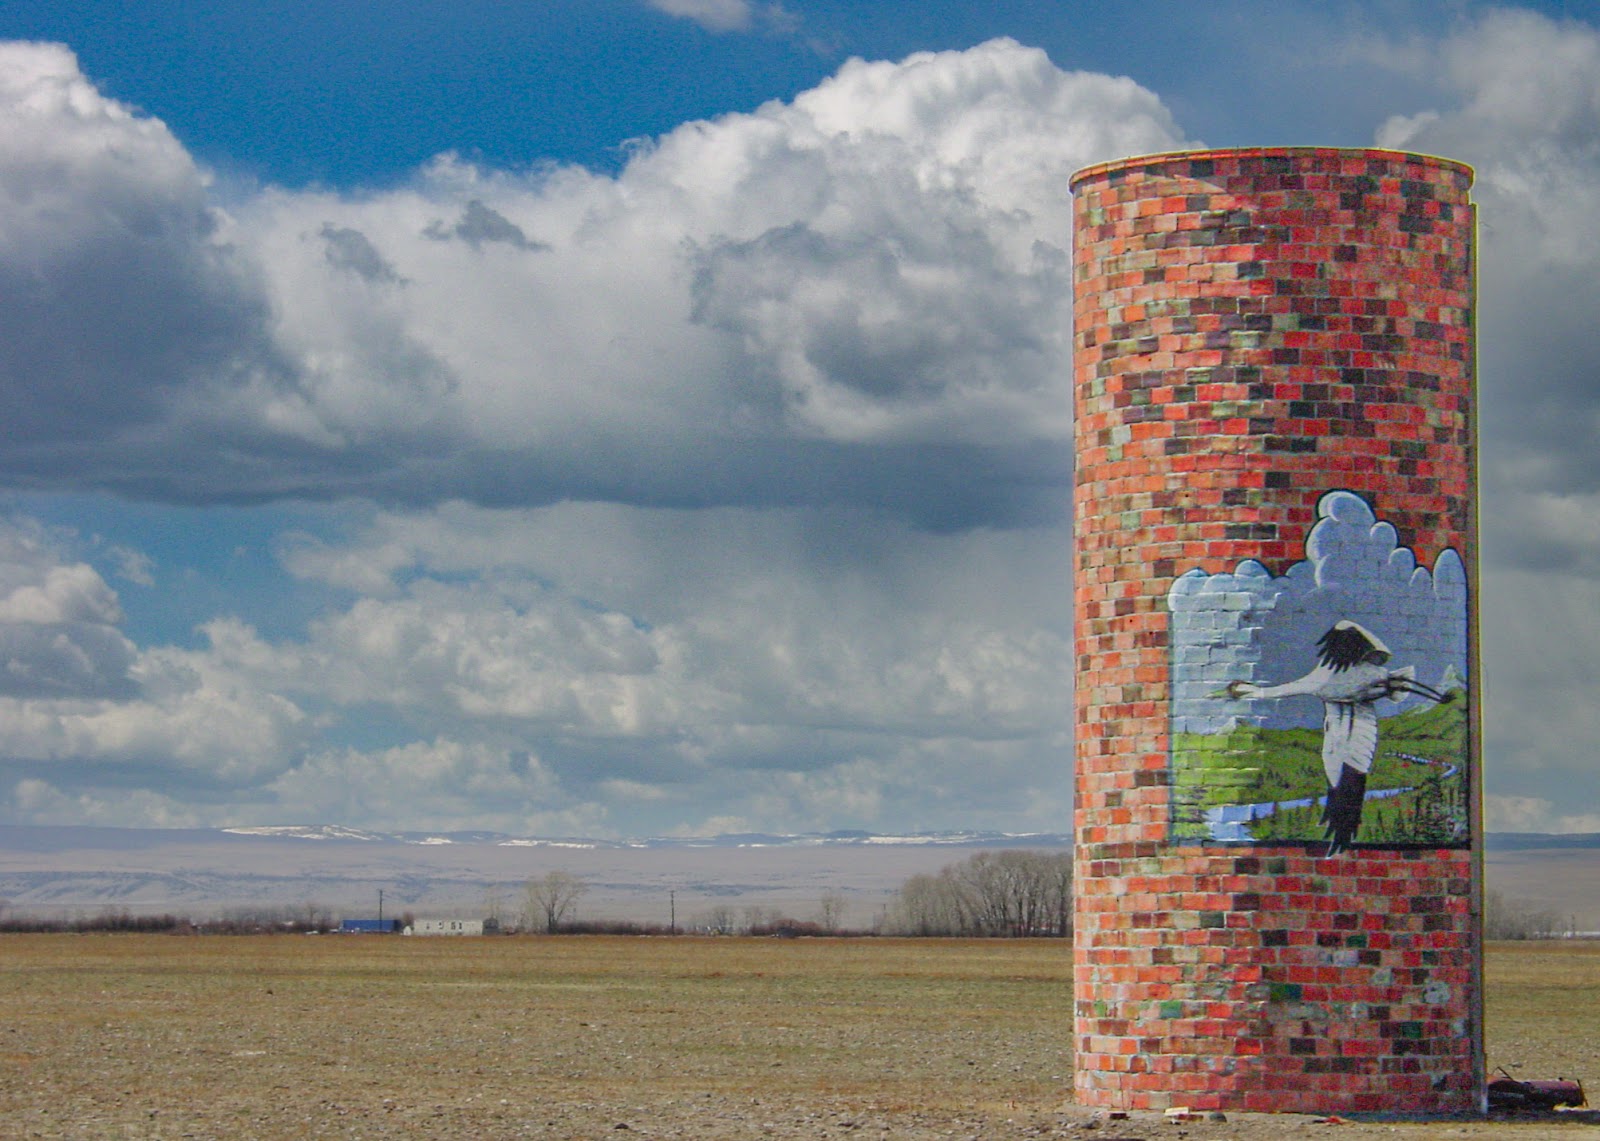 A multi-colored brik silo with mural of a woman gathering a harvest against a cloudy sky.